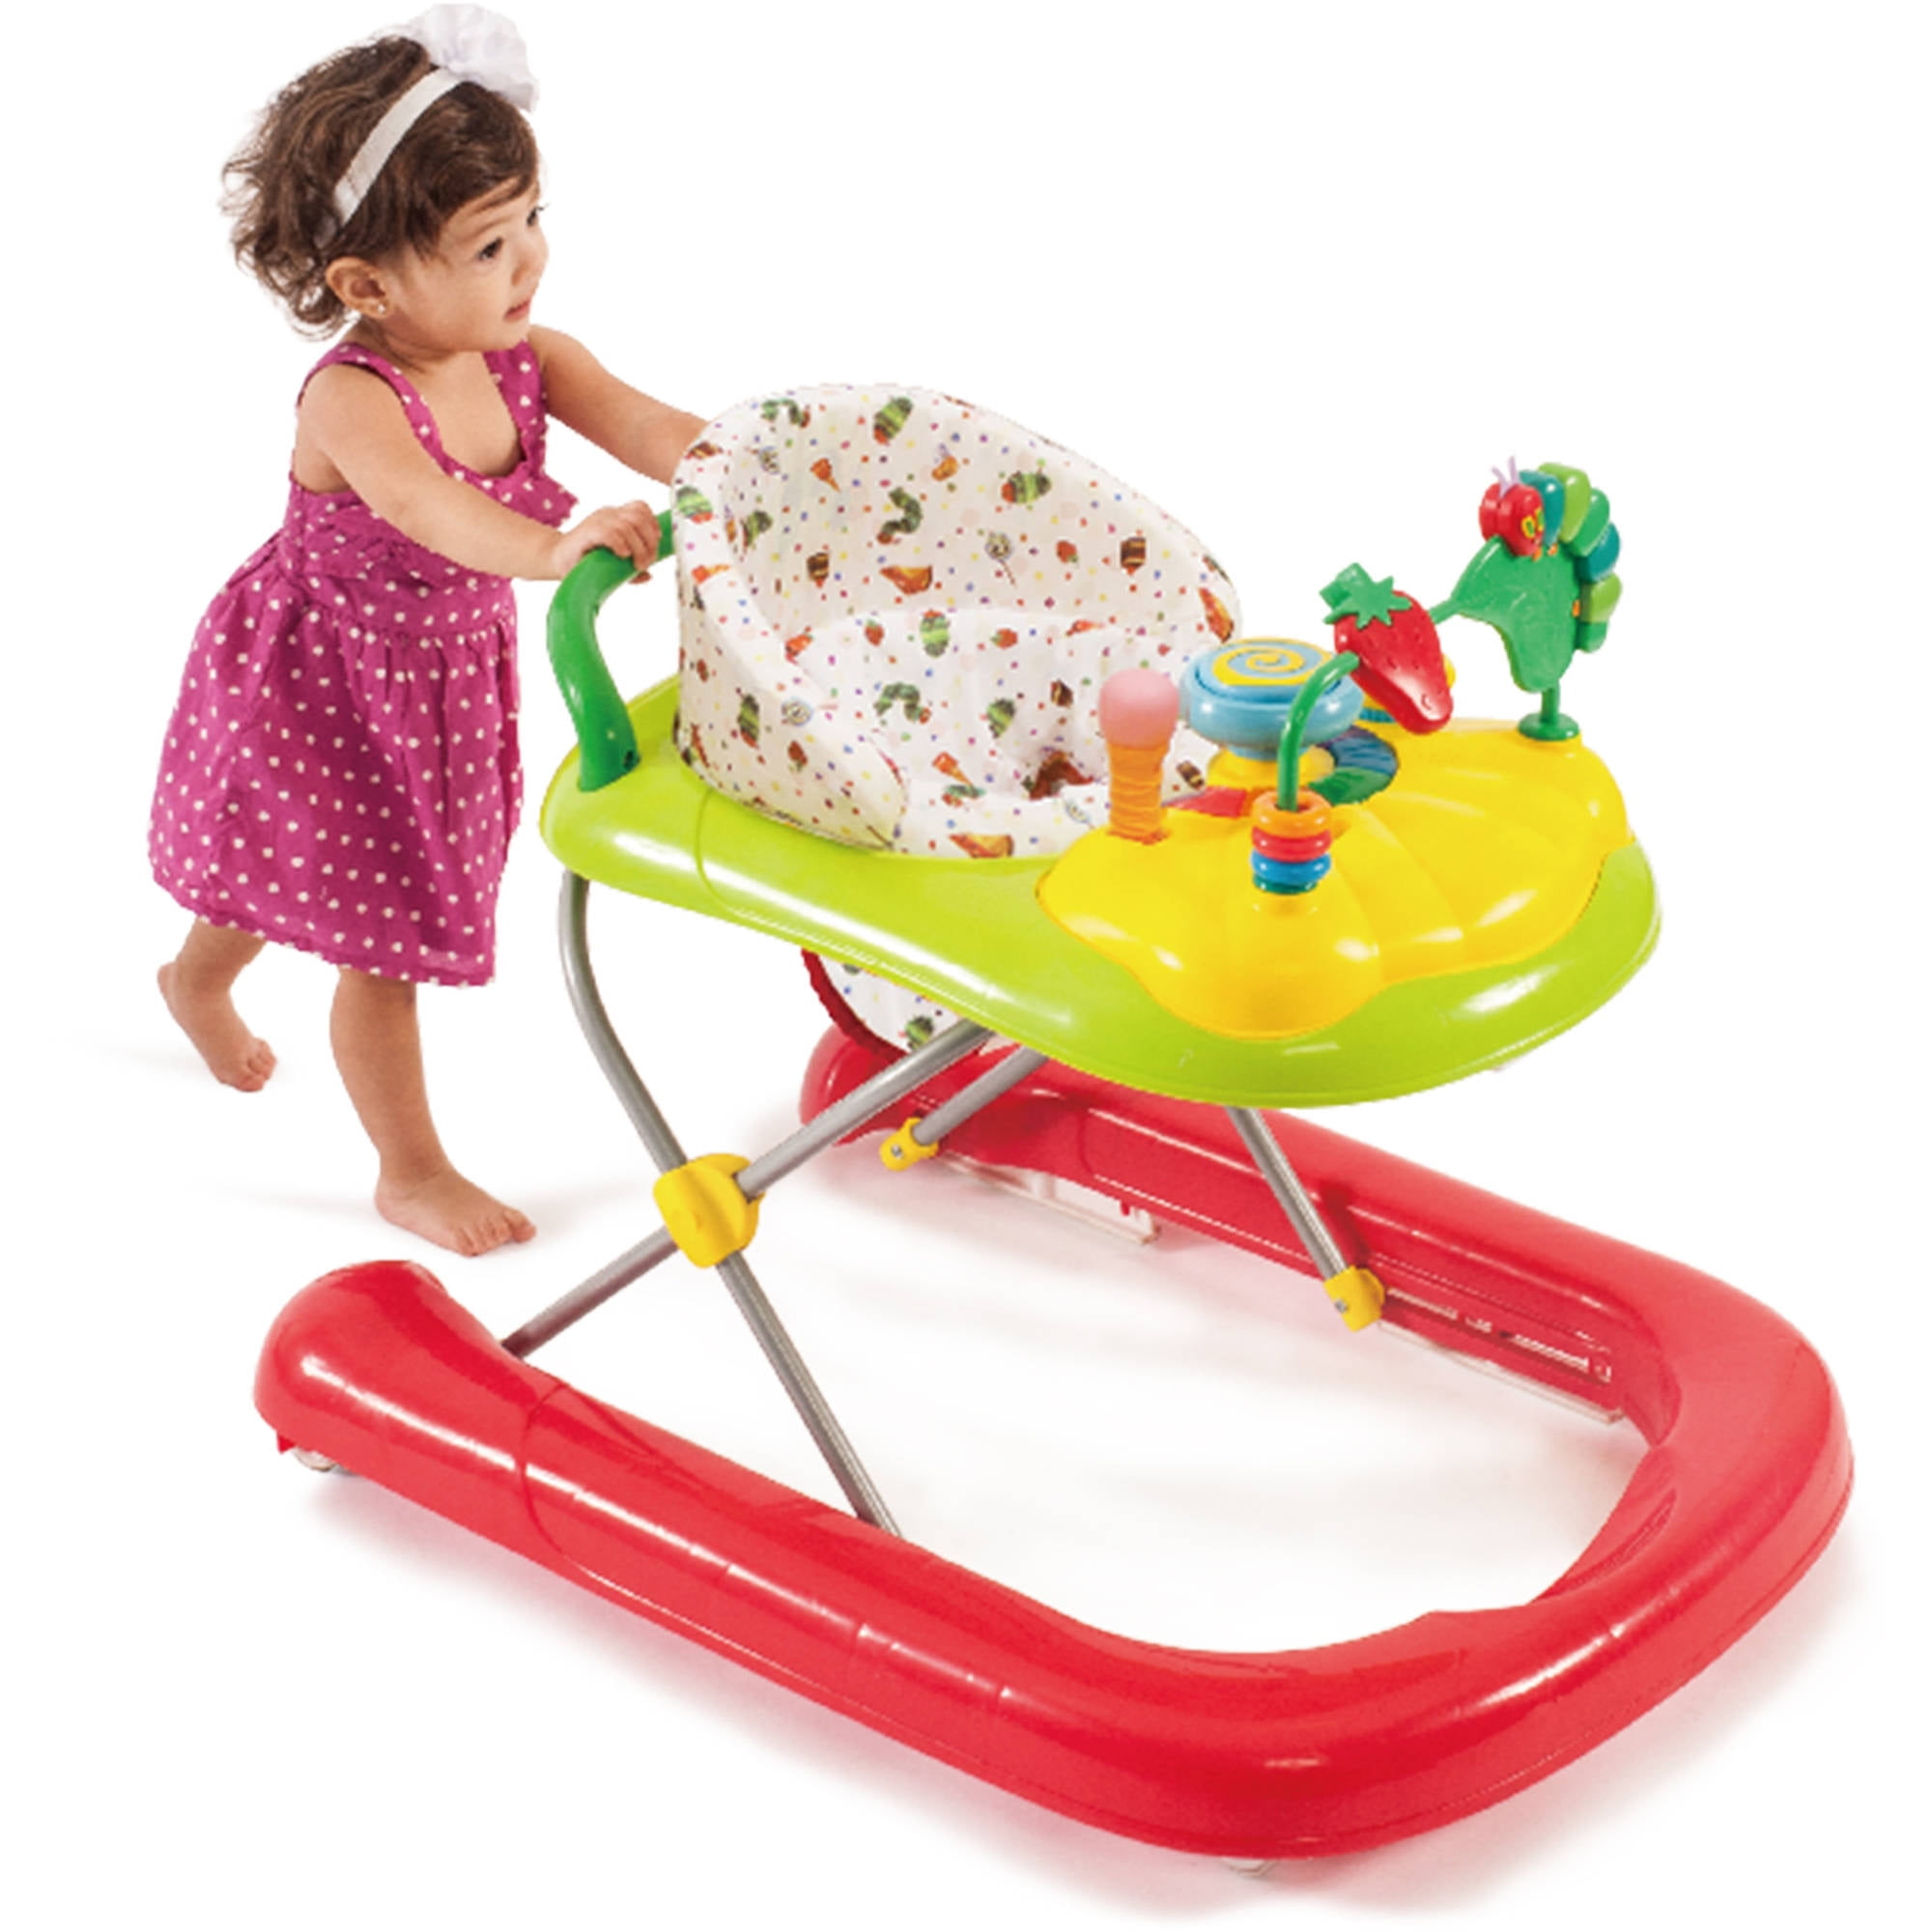 The Very Hungry Caterpillar 2-in-1 Walker Baby Holder Folding Seat Activity Play 